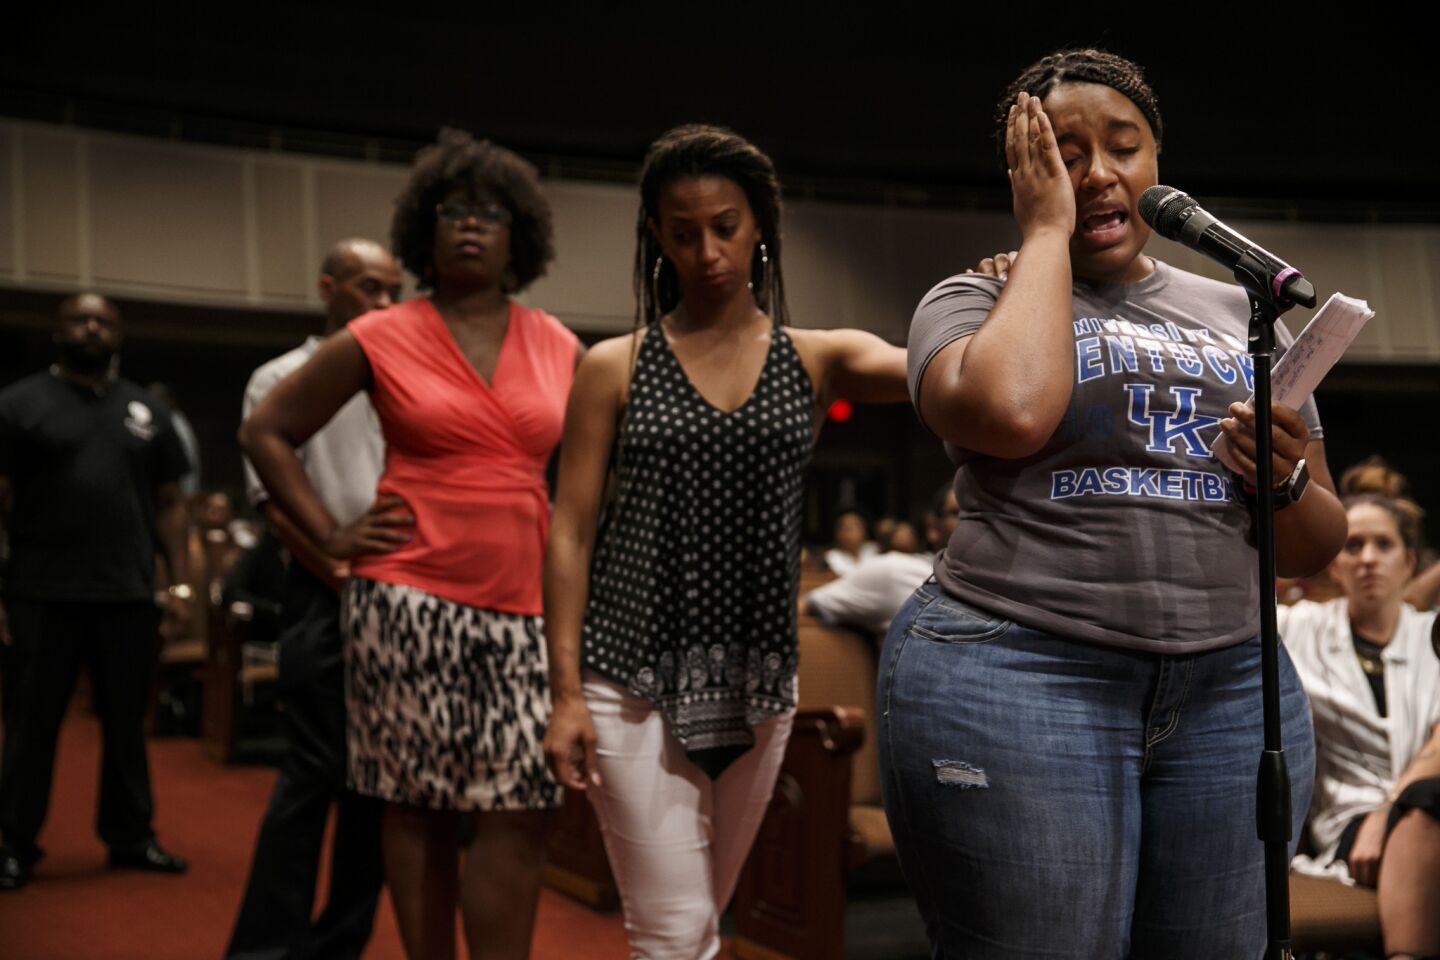 Porsha Jackson, right, speaks during a community meeting at a Dallas church on Sunday.